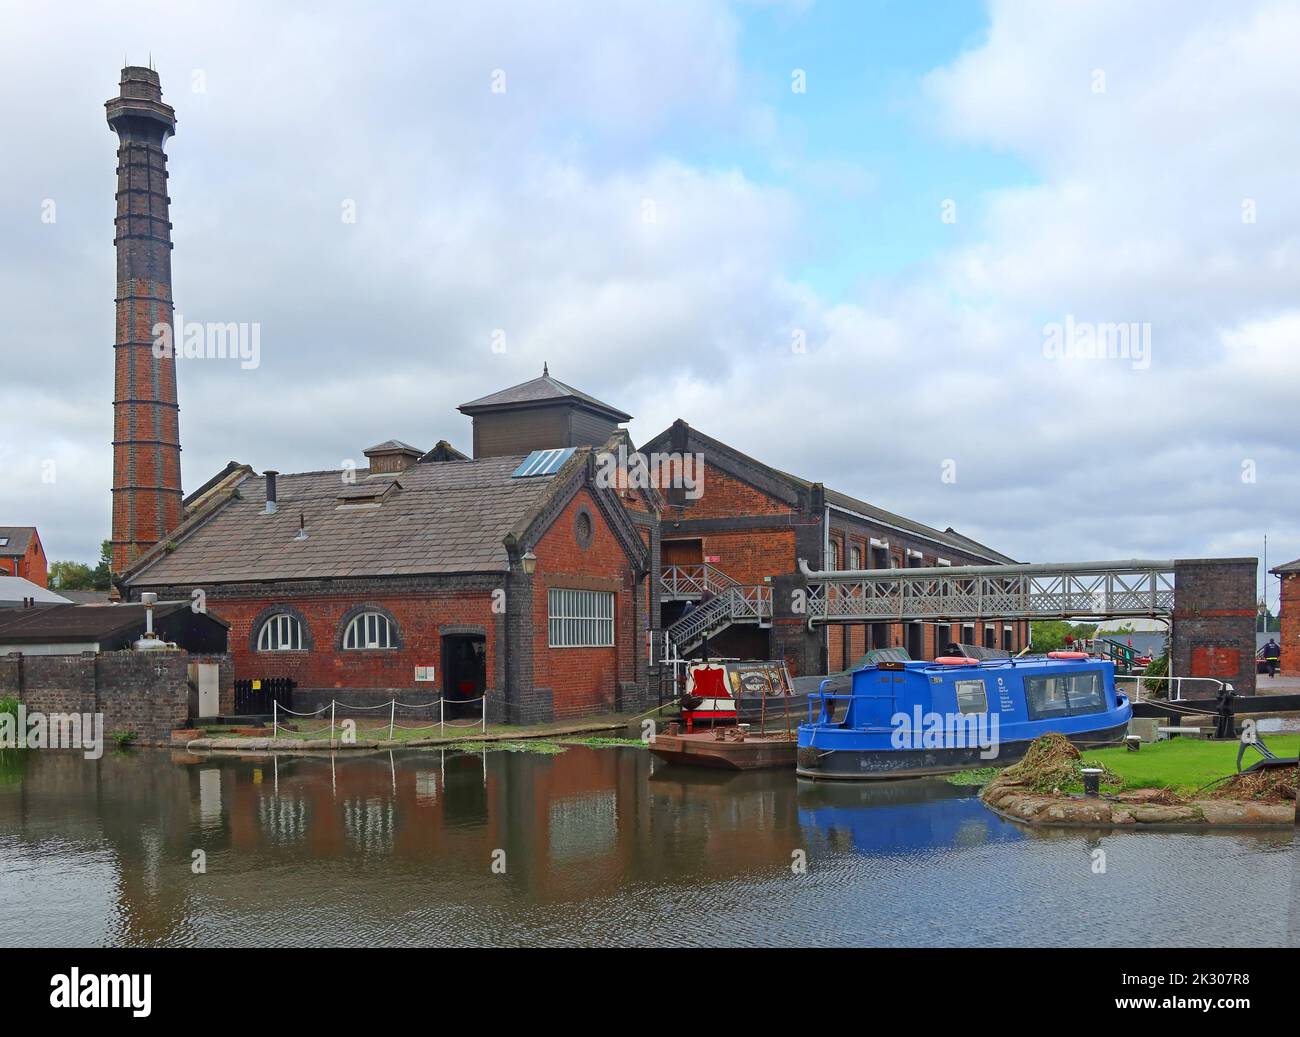 Shropshire Union Canal locks at Ellesmere Port, showing pump house chimney and old Victorian waterway buildings Stock Photo